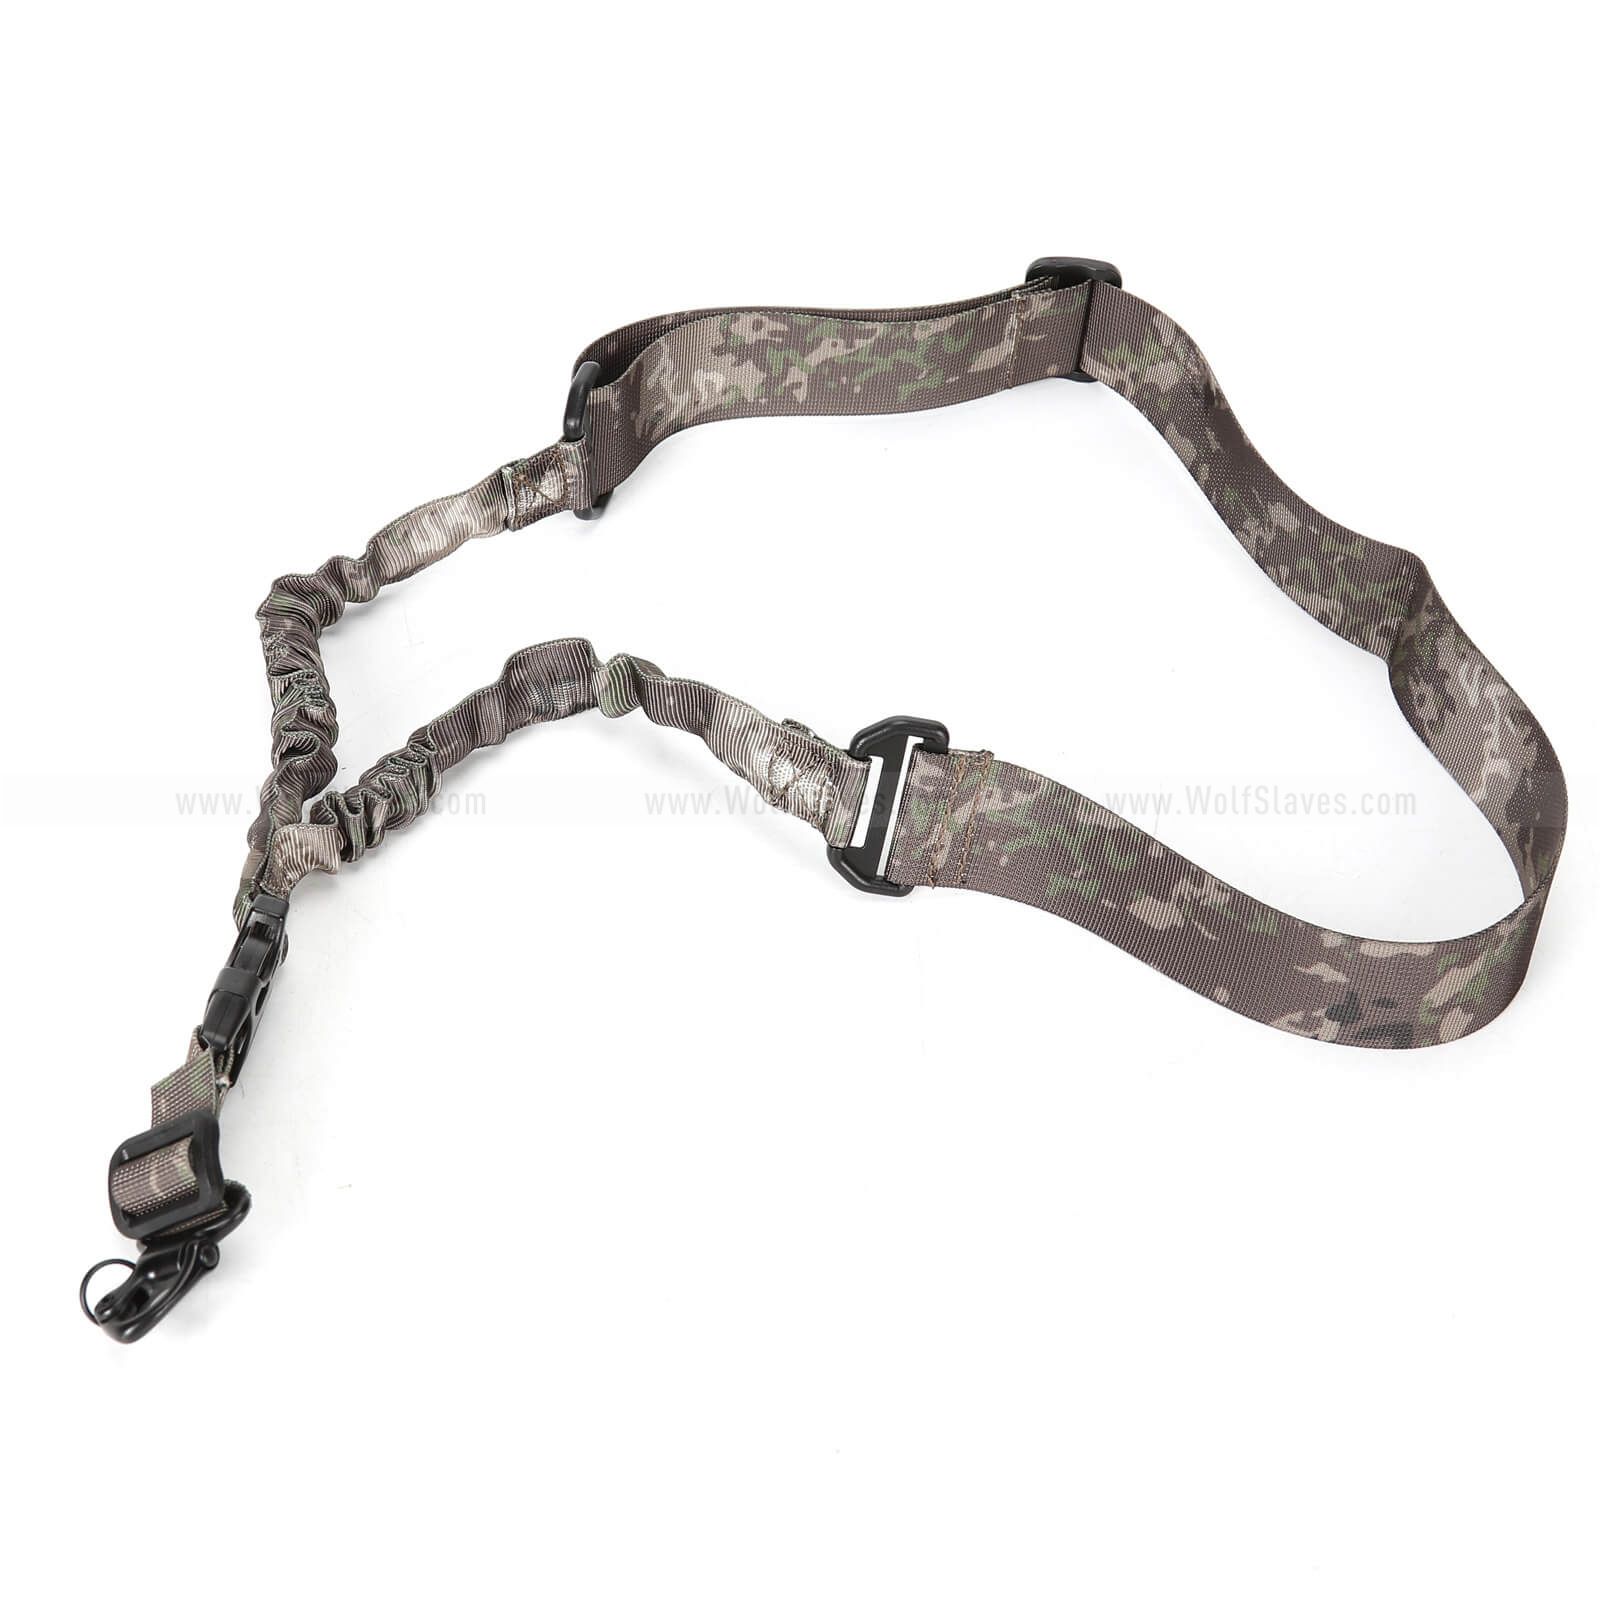 1 Single Point Adjustable Tactical Bungee Hook For Rifle Sling Strap System 